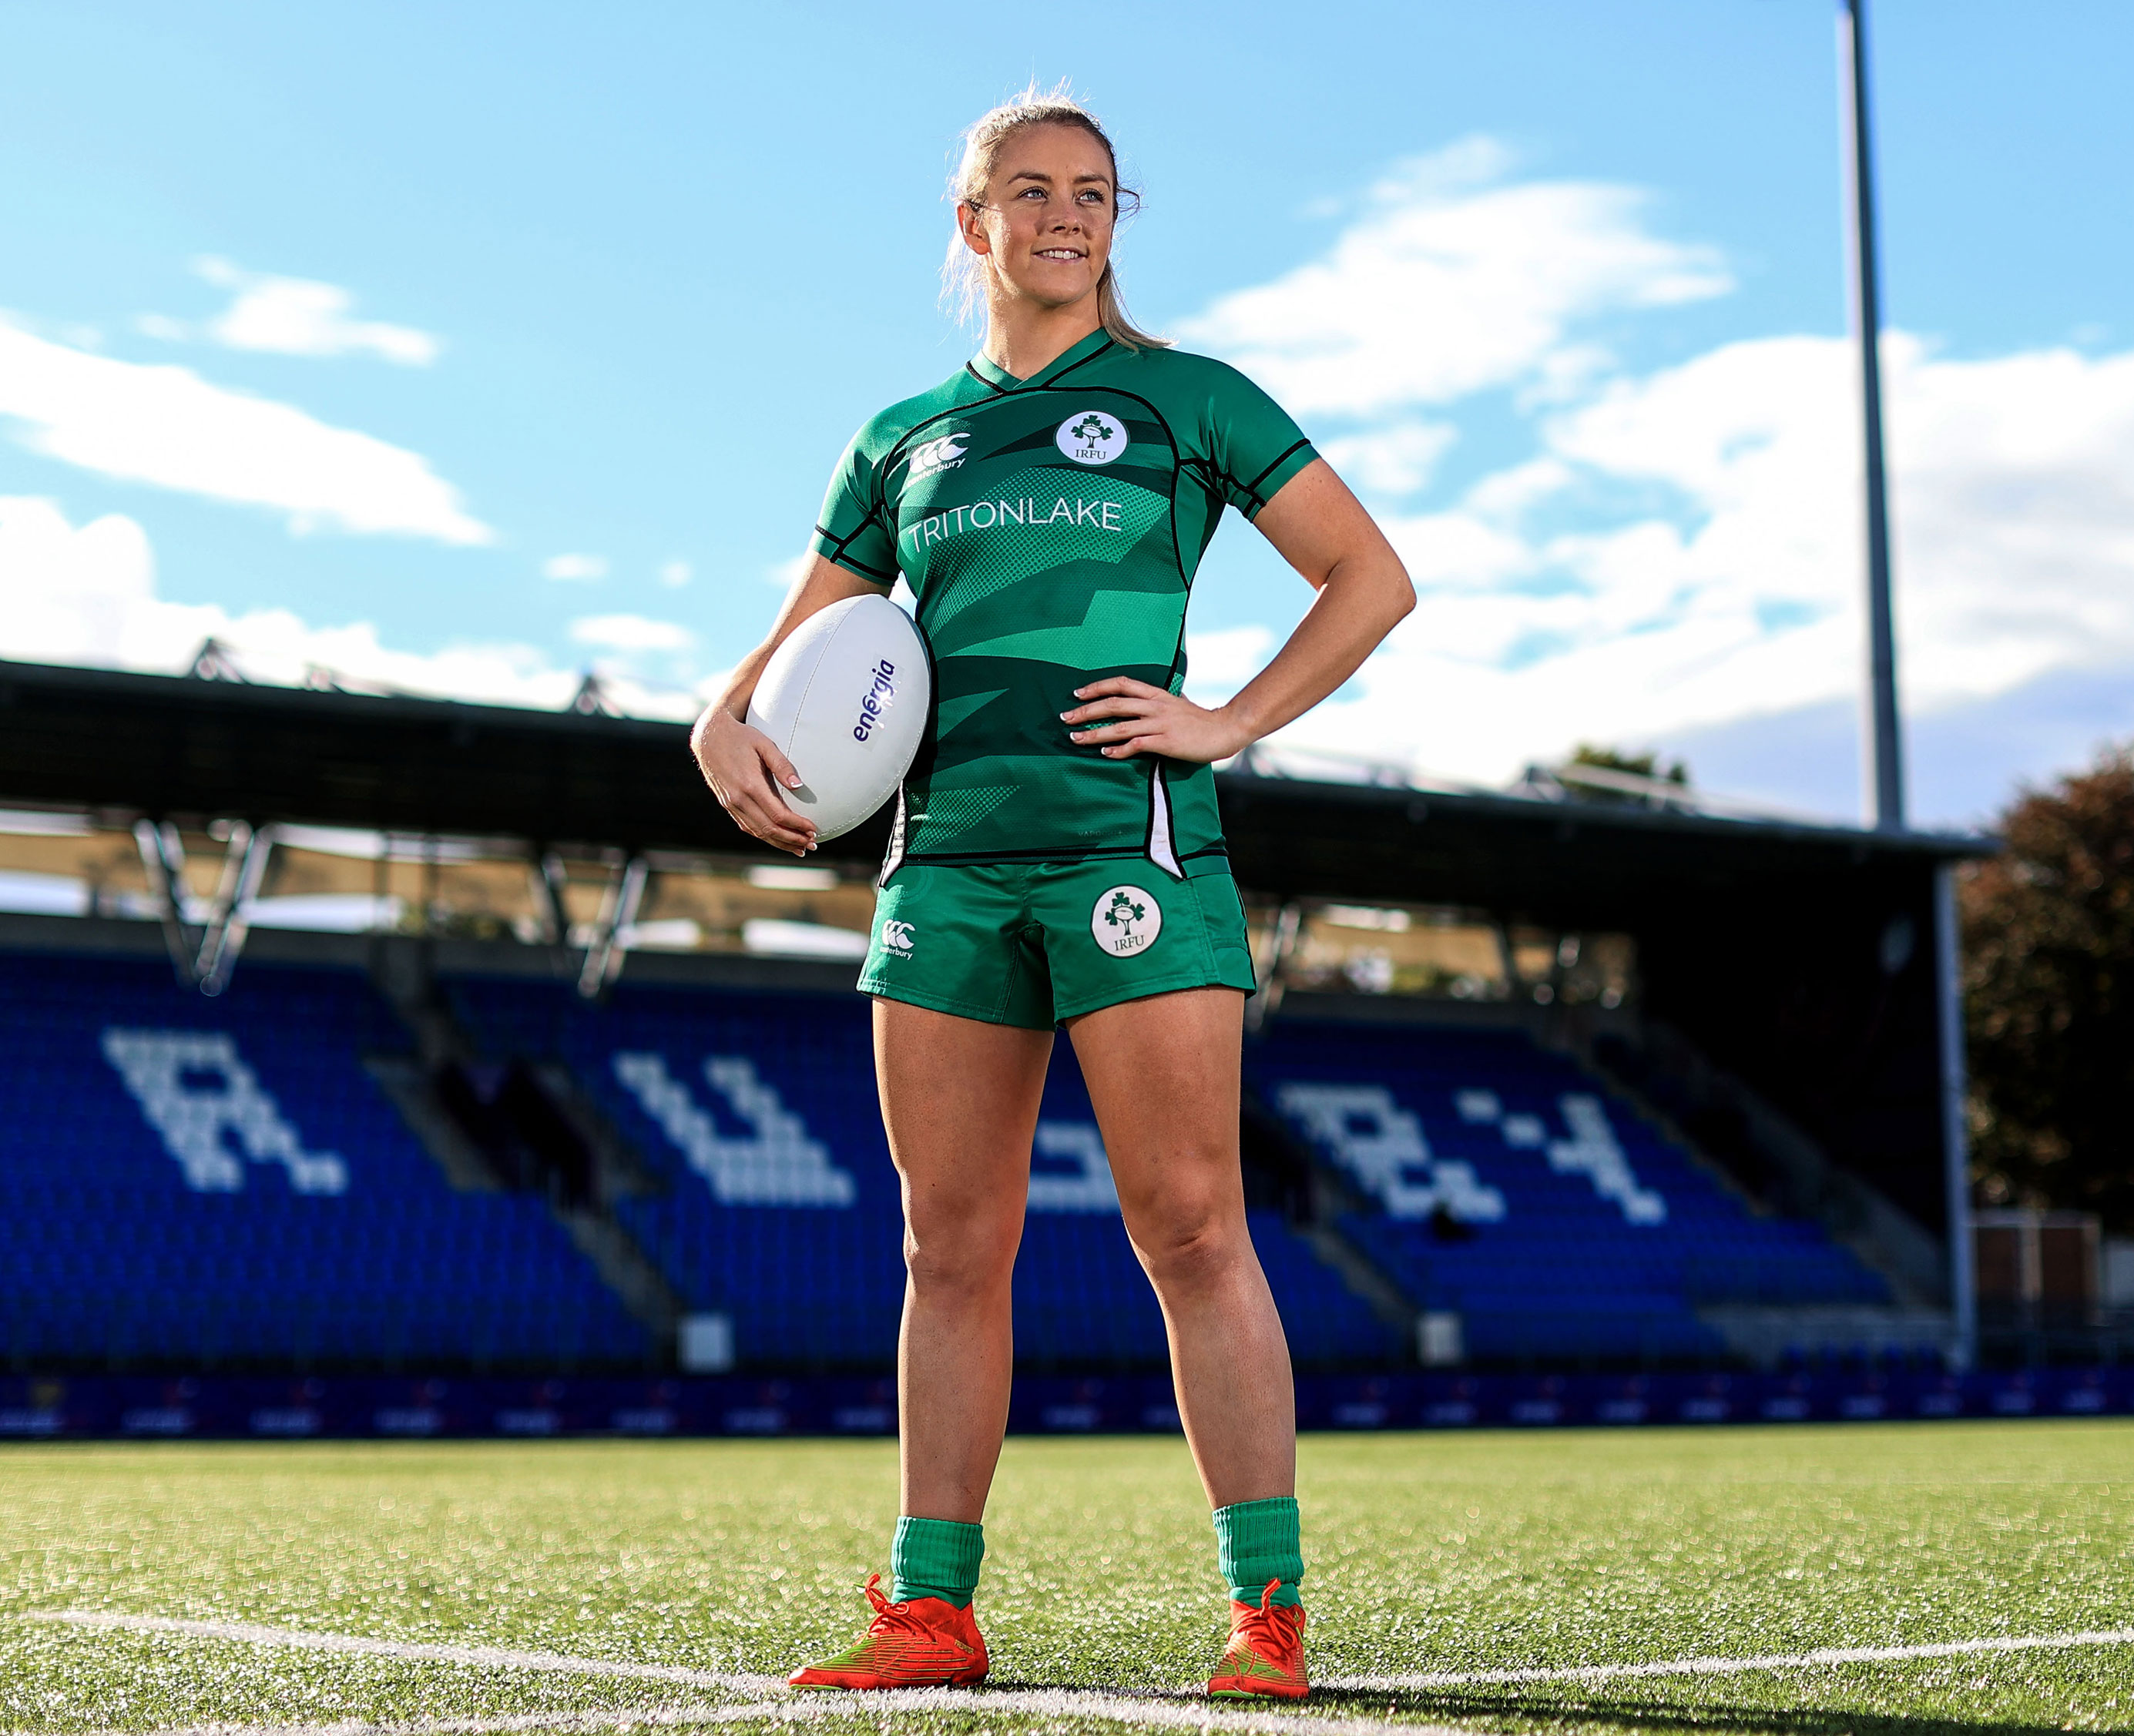 Female rugby player Stacey Flood holding a ball